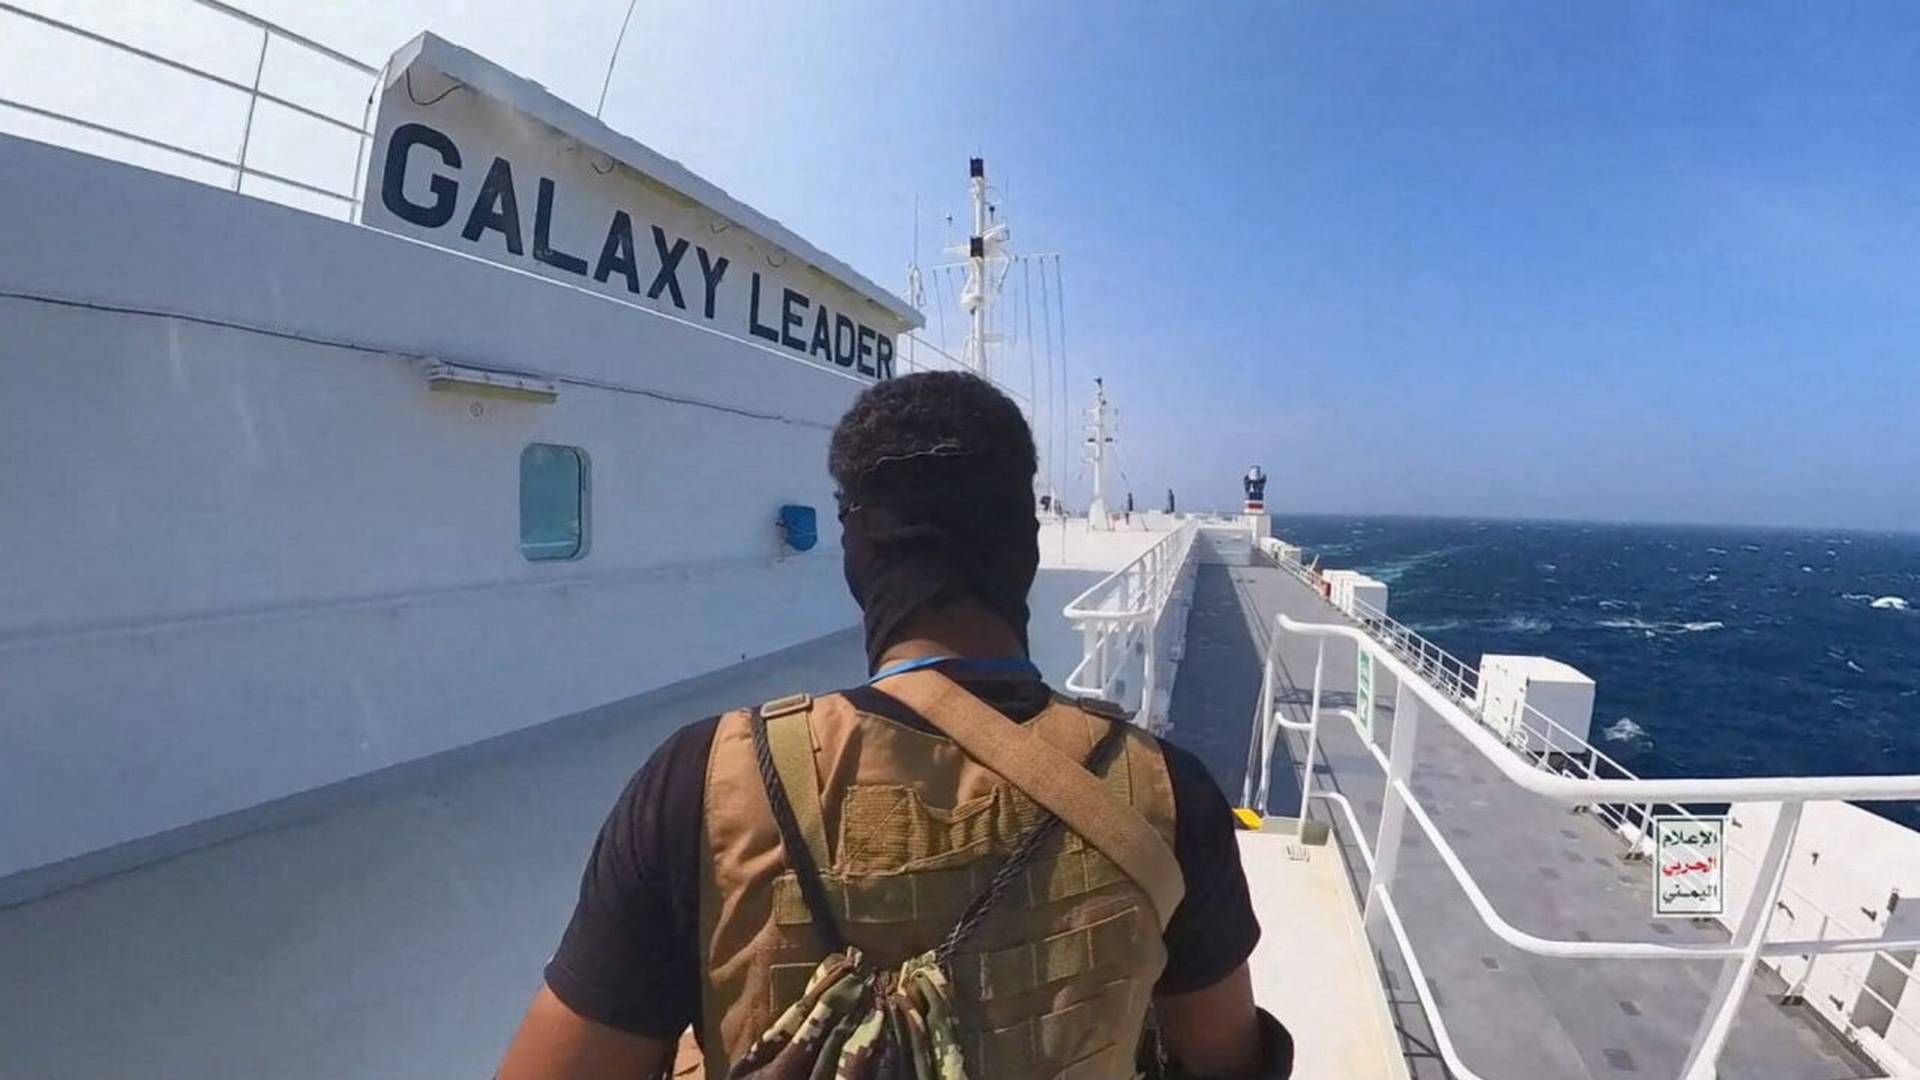 A member of the Houthi movement pictures standing on the car carrier ship Galaxy Leader, which was hijacked in the Red Sea in November. In the past week, a series of container ships have been attacked by the militia. | Photo: Houthi Military Media/Reuters/Ritzau Scanpix